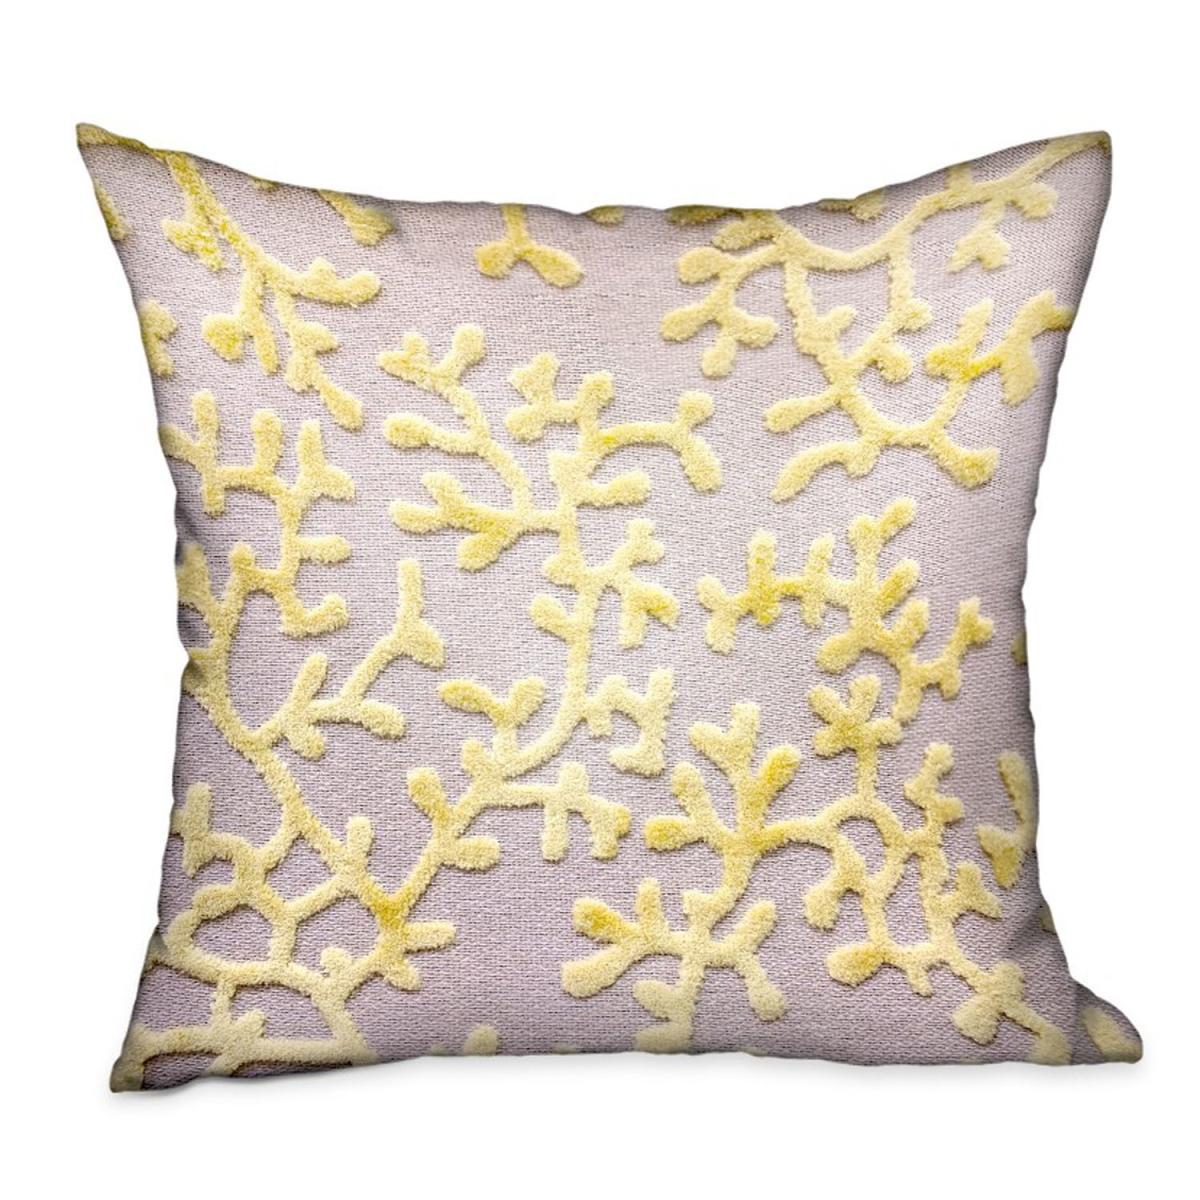 Picture of Plutus Brands PBDU1902-1818-DP 18 x 18 in. Lemon Reef Yellow & Cream Floral Luxury Throw Pillow